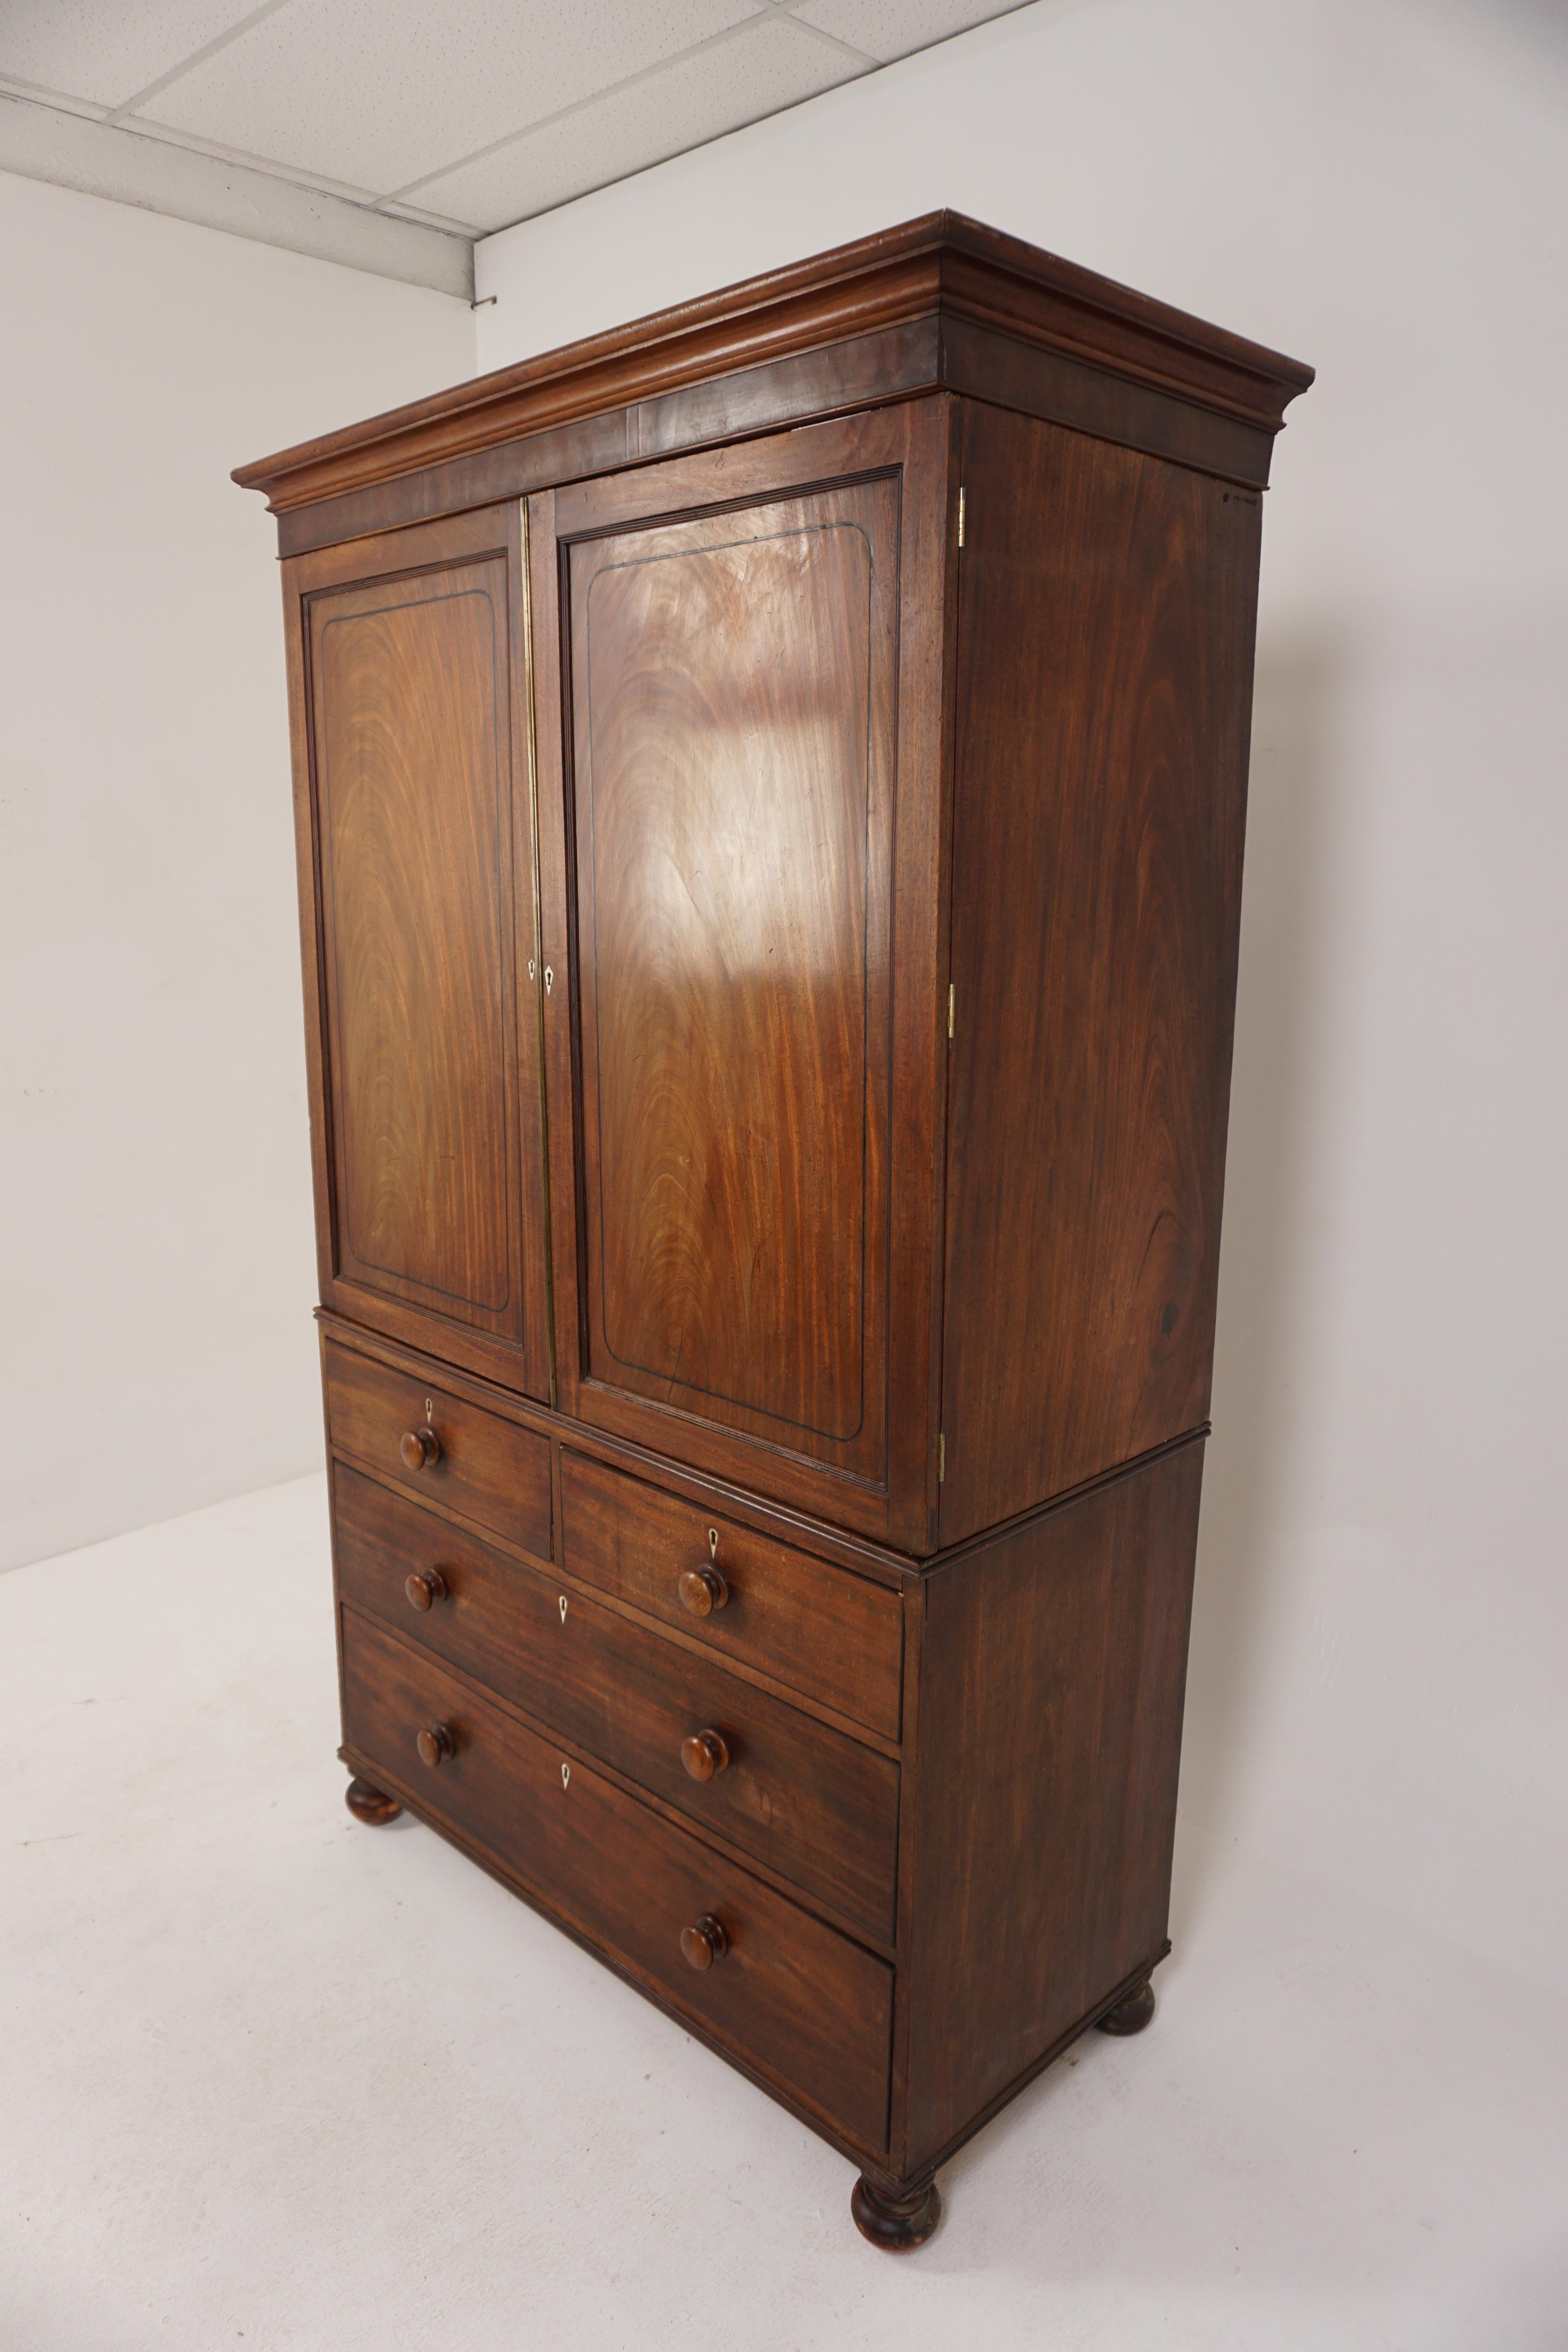 Georgian Inlaid walnut Linen press. Armoire dresser, Scotland 1820, B2945

Scotland 1820
Soid Walnut and Veneer
Original finish
Moulded Cornice on Top
Pair of inlaid paneled doors
Open to reveal pair metal pull out hangers (not